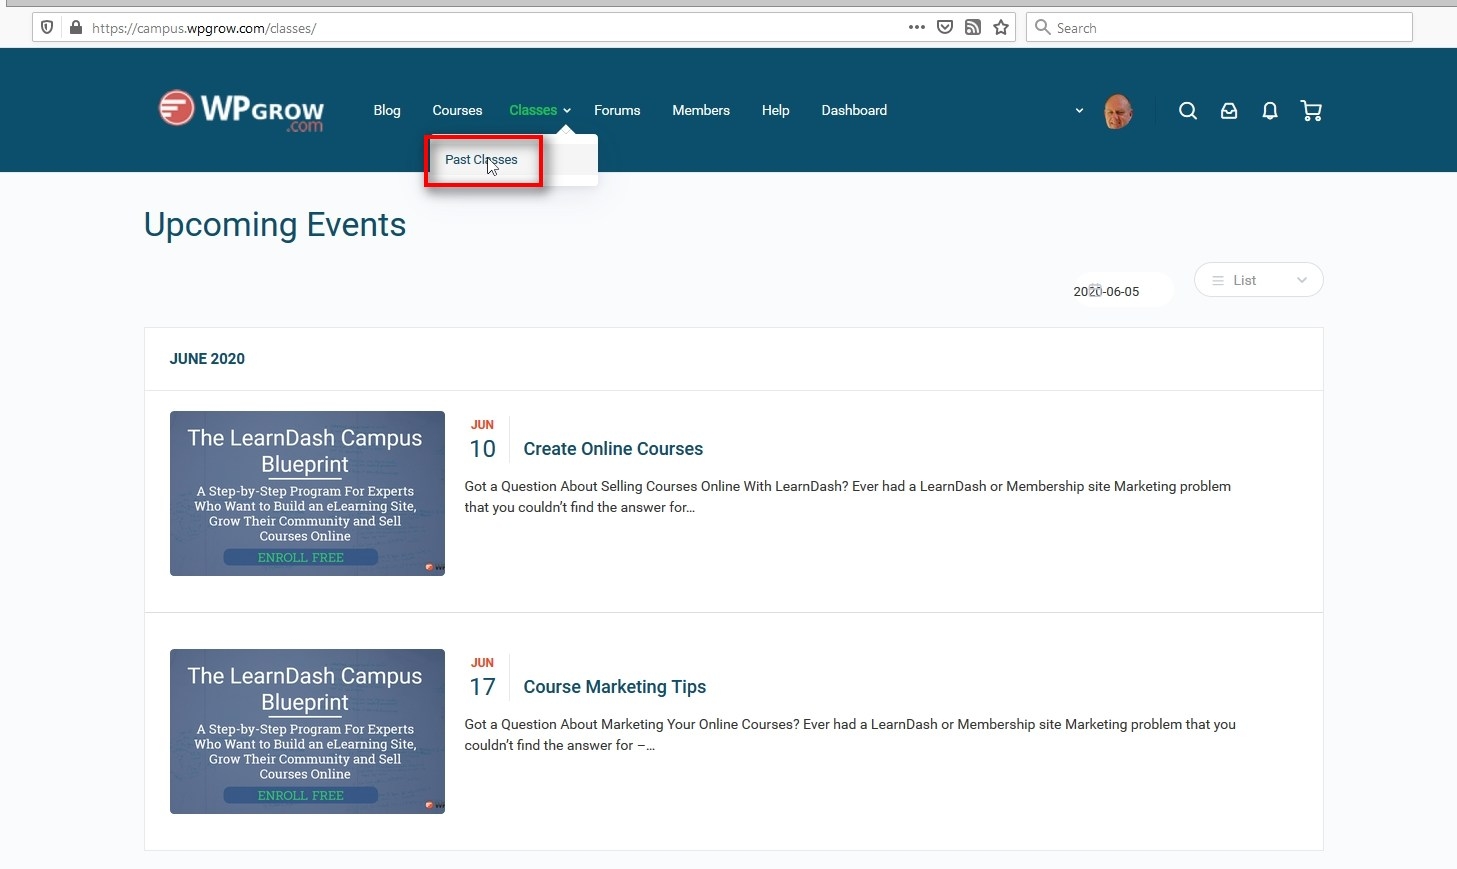 Leverage Recorded Events Click on Past Classes and on your site you'll be brought to a unique search page.
